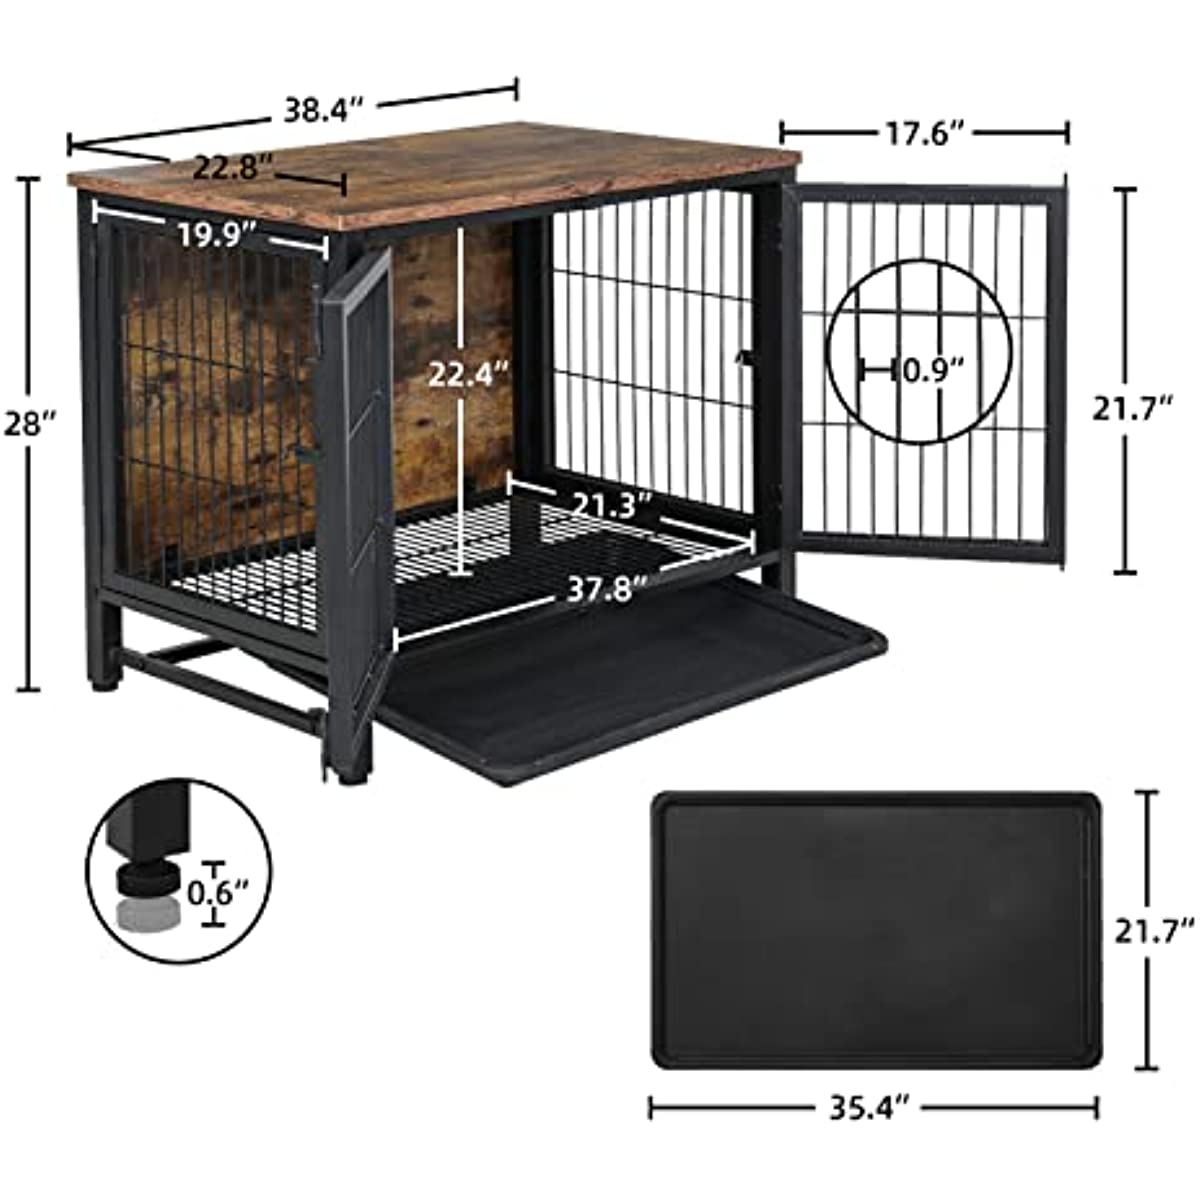 Size of large wooden dog crate furniture with tray 